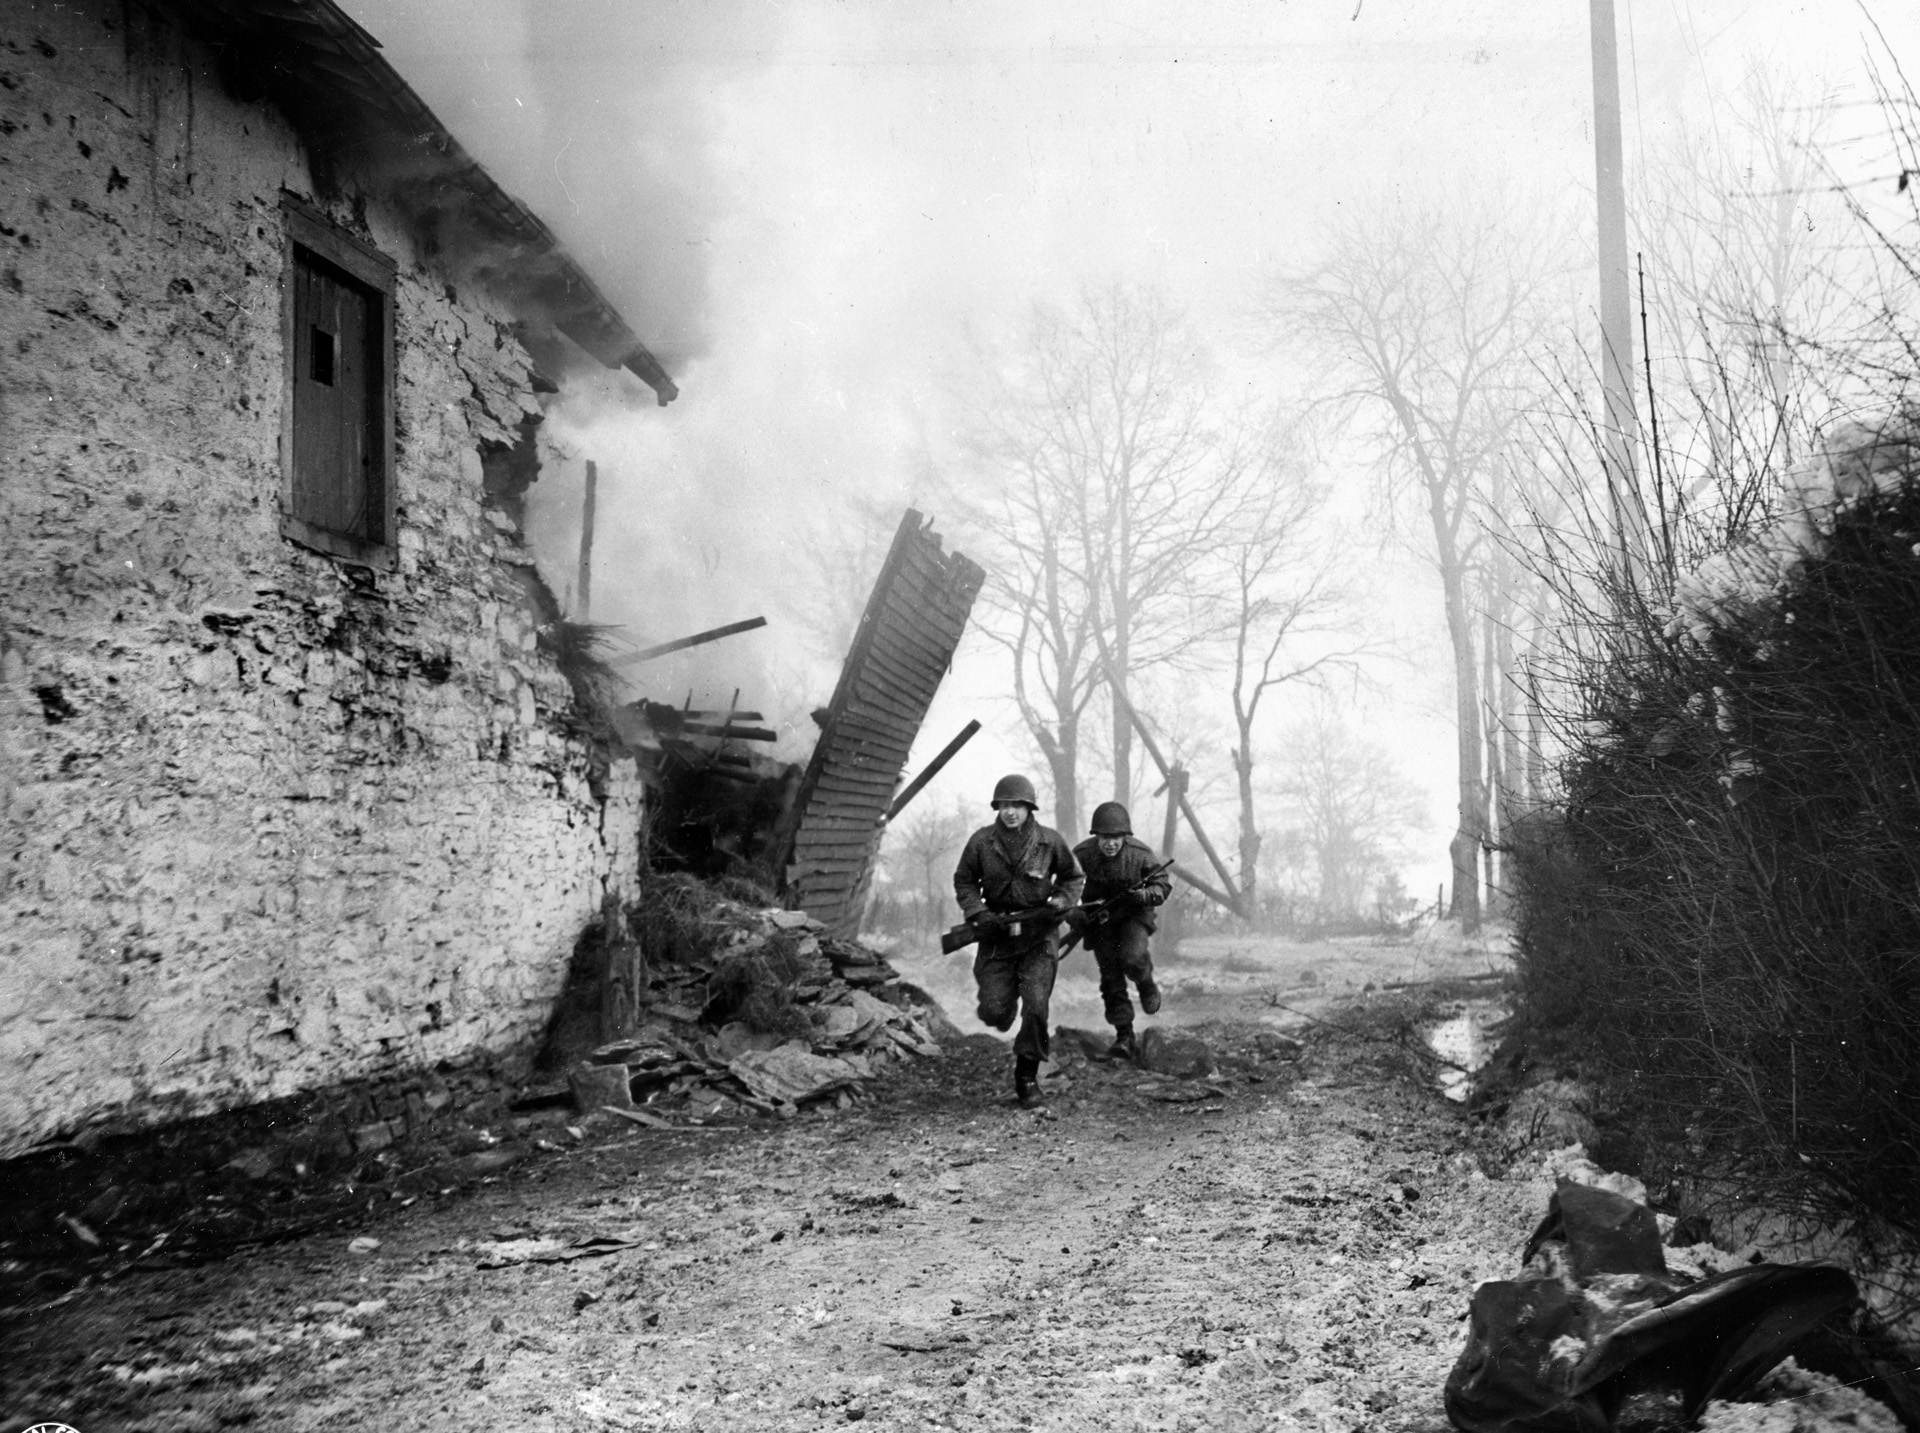 Two GIs run for cover during the Battle of the Bulge. The Nazis initiated their Ardennes Offensive in December 1944, hoping to cross the River Meuse and advance to the port of Antwerp, Belgium, splitting Allied forces in two. Hitler authorized Operation Nordwind two weeks after the Ardennes Offensive was launched in an attempt to exploit gains made to the north as the Allies shifted troops and military assets in response to the Ardennes threat. The stand at Hatten was critical in wresting the initiative away from the Germans.